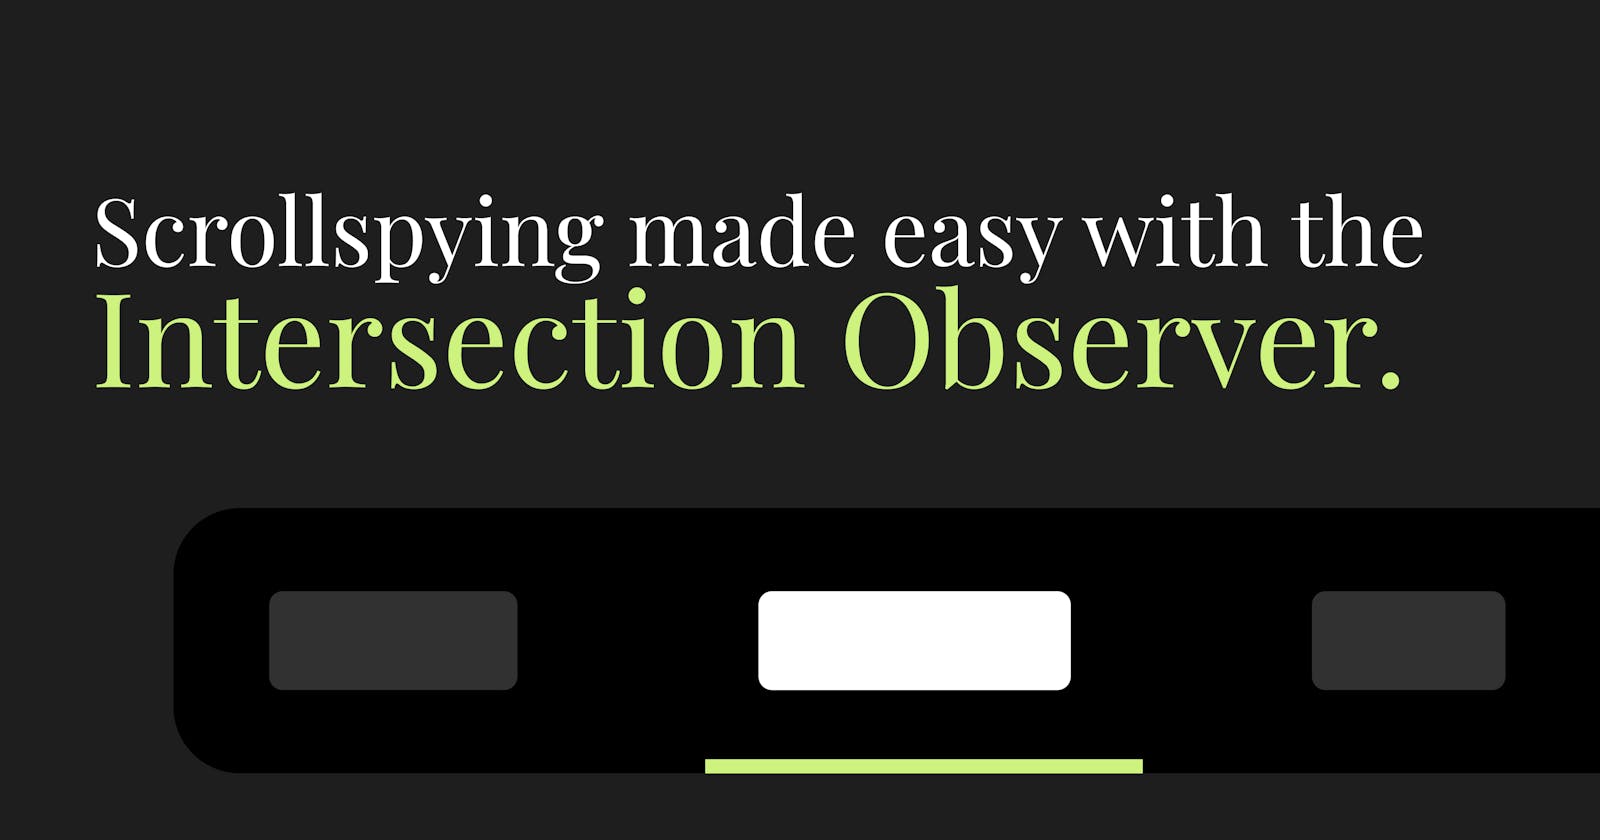 Scrollspying made easy with the Intersection Observer API.